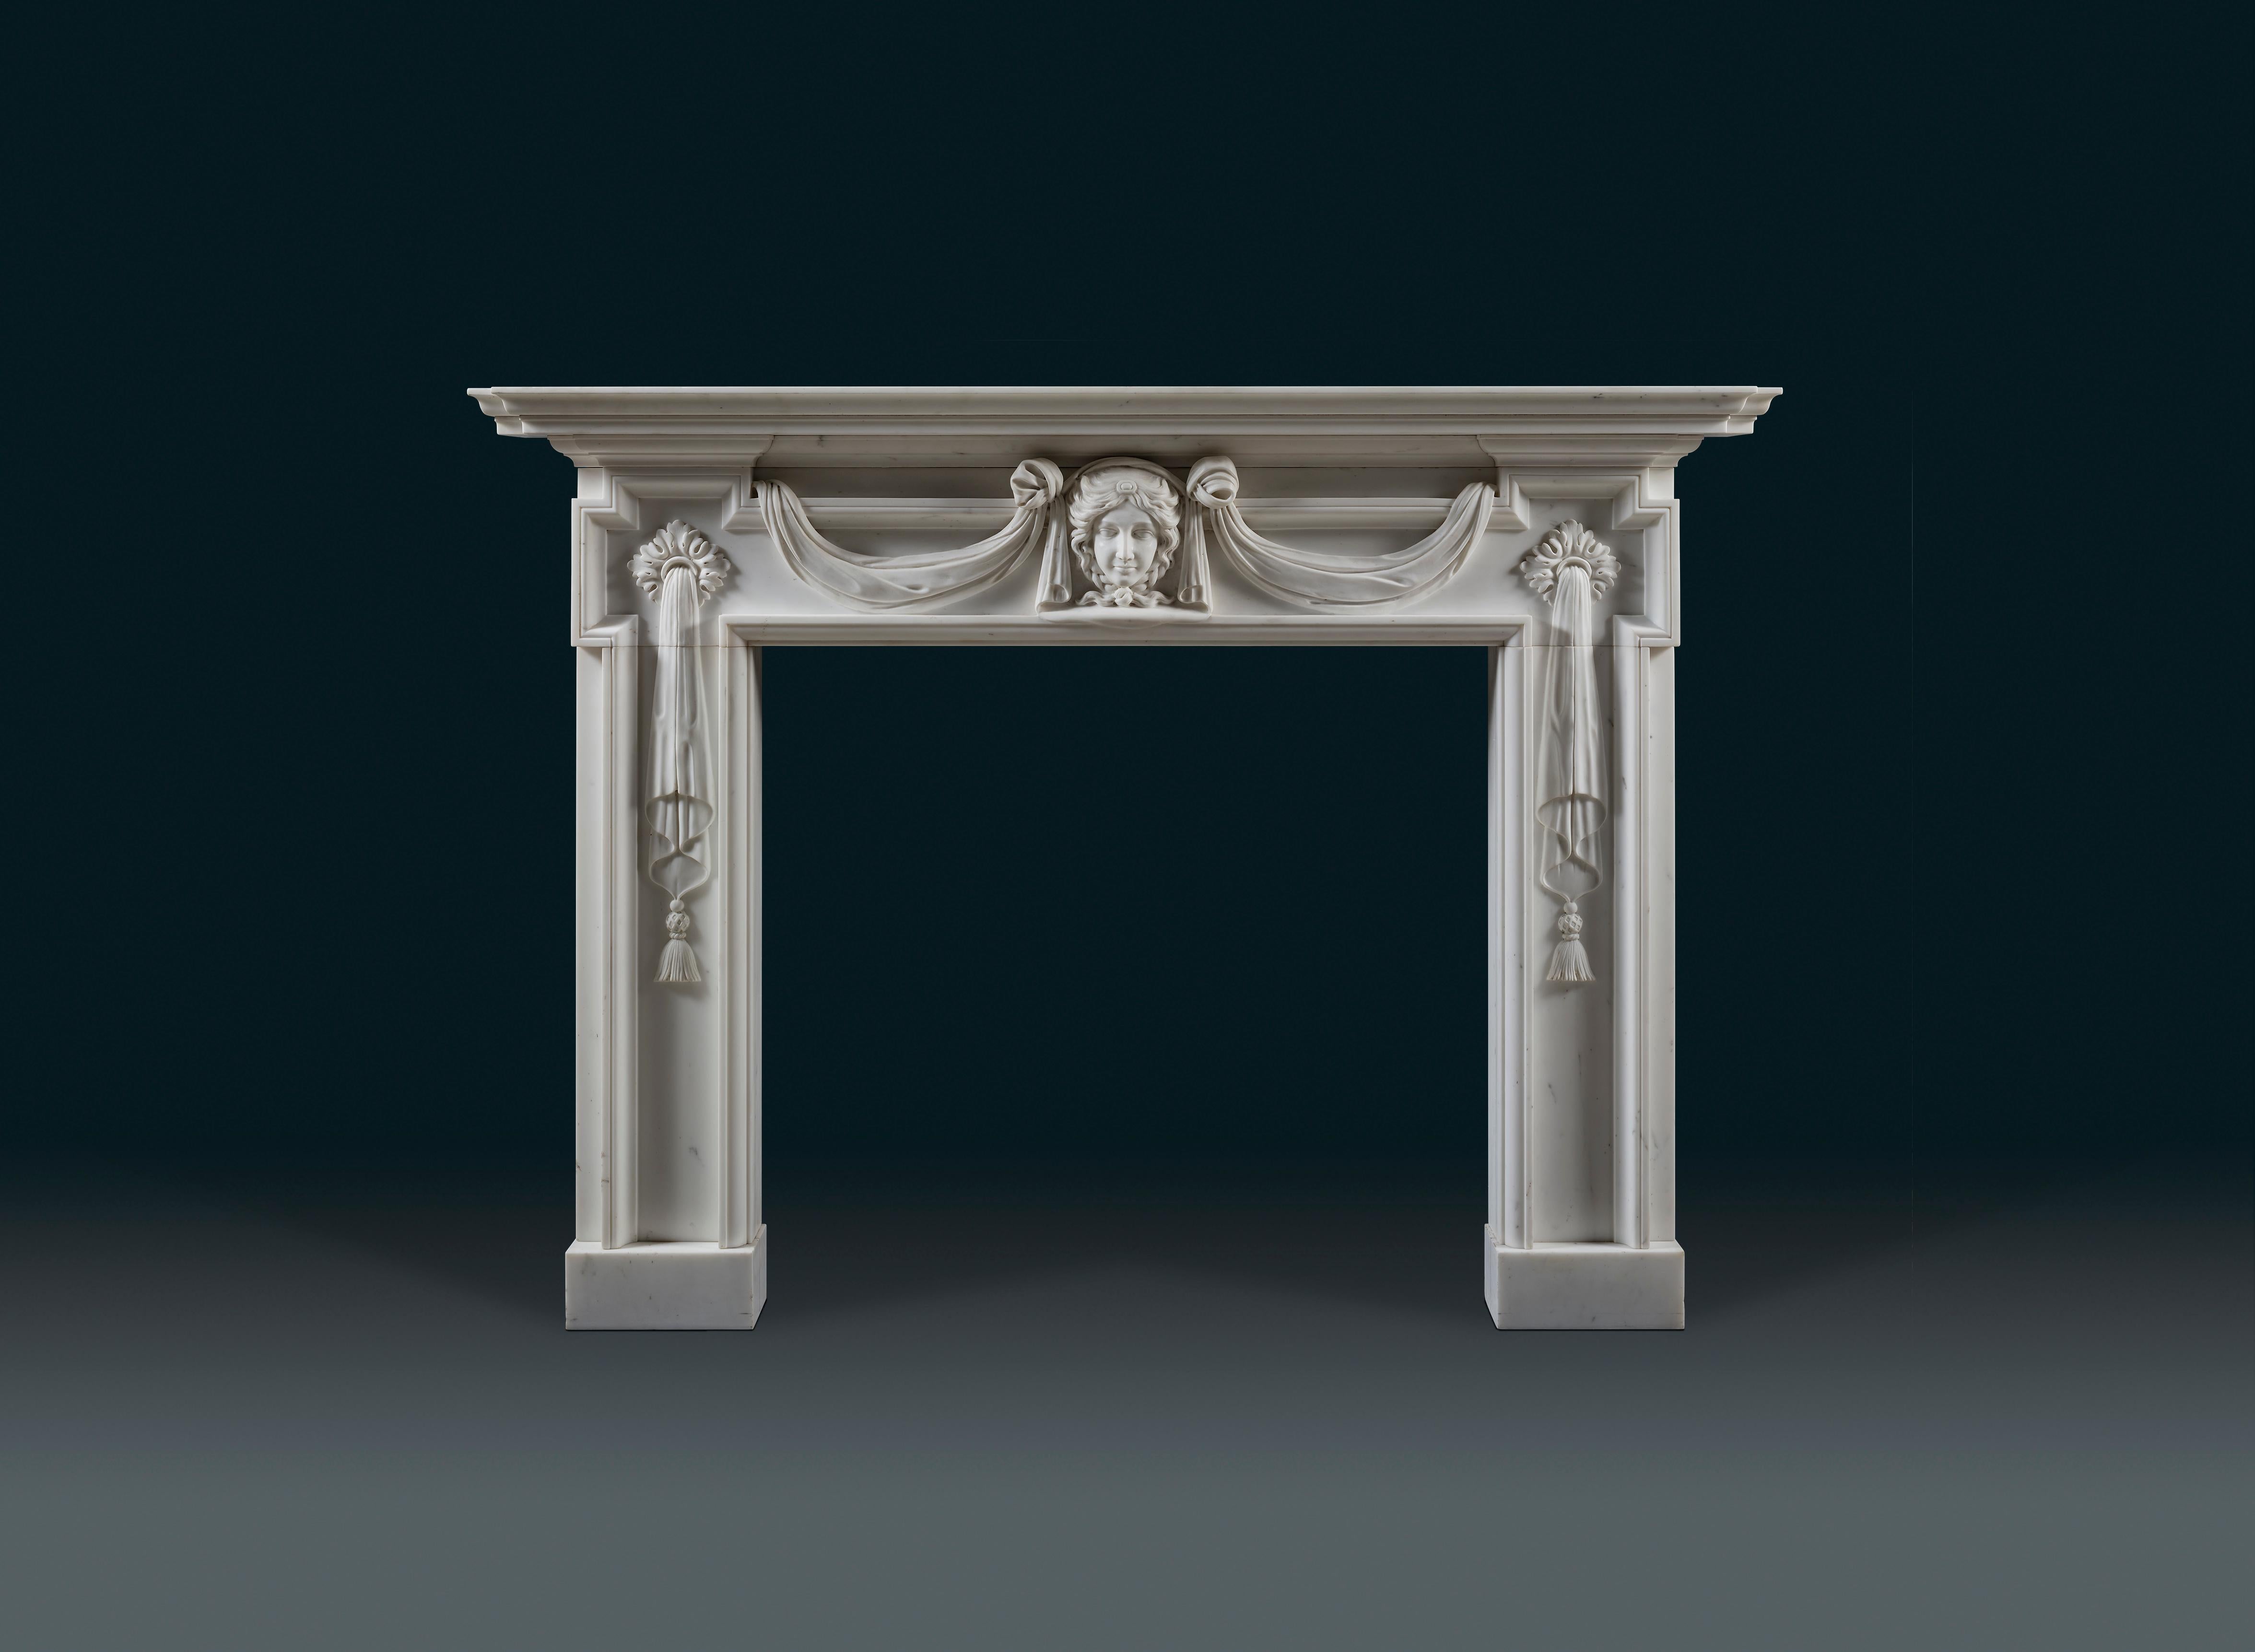 A 19th century Palladian revival Statuary marble chimneypiece. Venus, the Roman Goddess of love and wife to Vulcan (God of fire), presides over the fire from her central position in the frieze. Carved drapery frames her mask and runs behind the